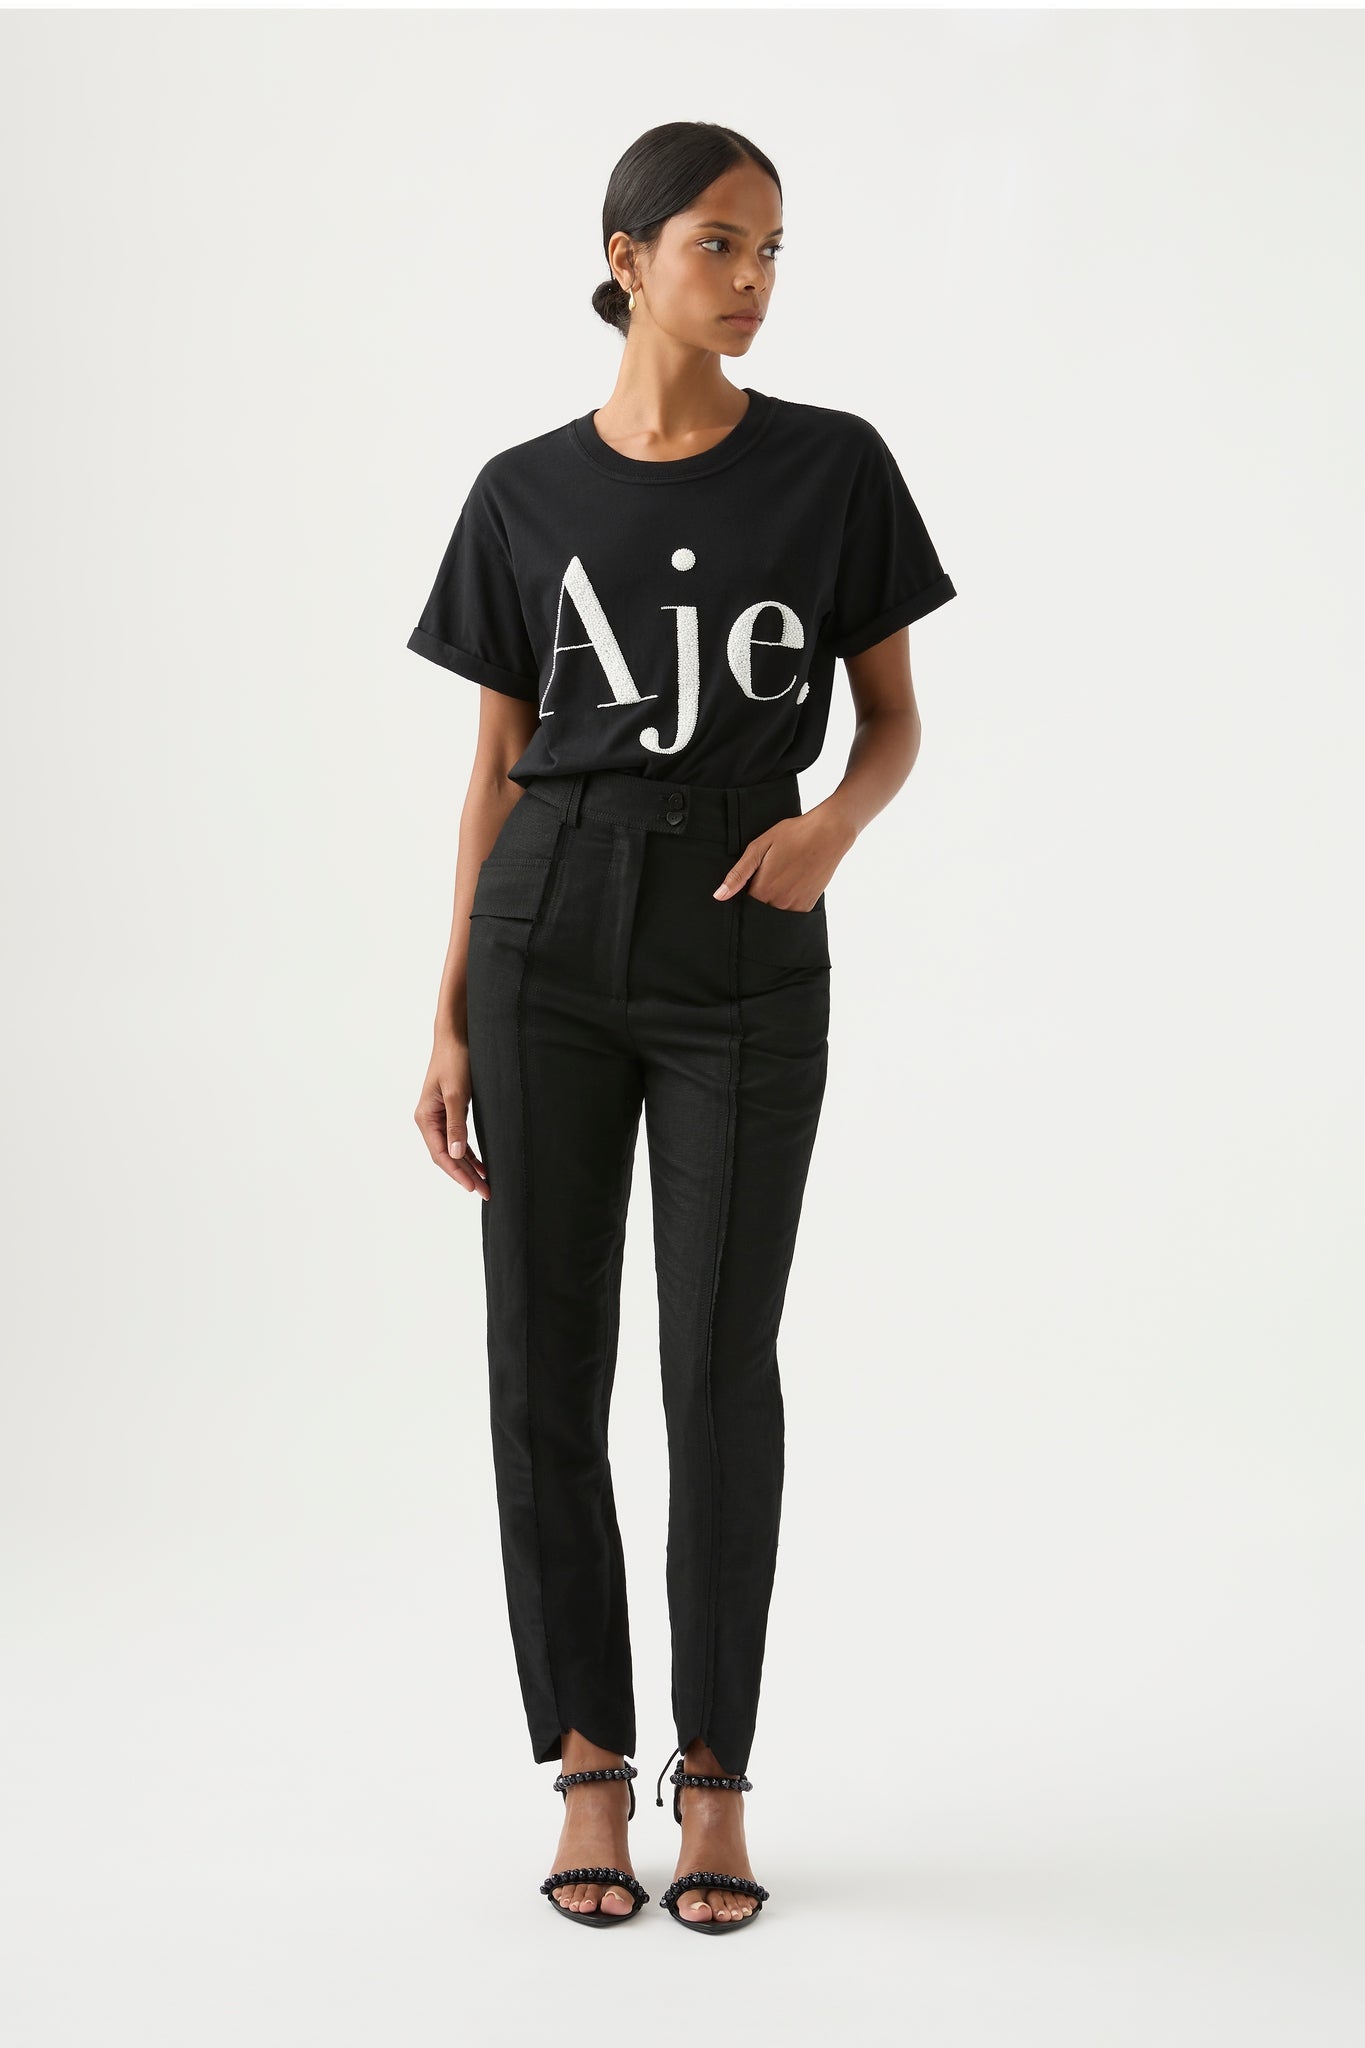 Aje is about to open 11 standalone Aje Athletica stores - Ragtrader